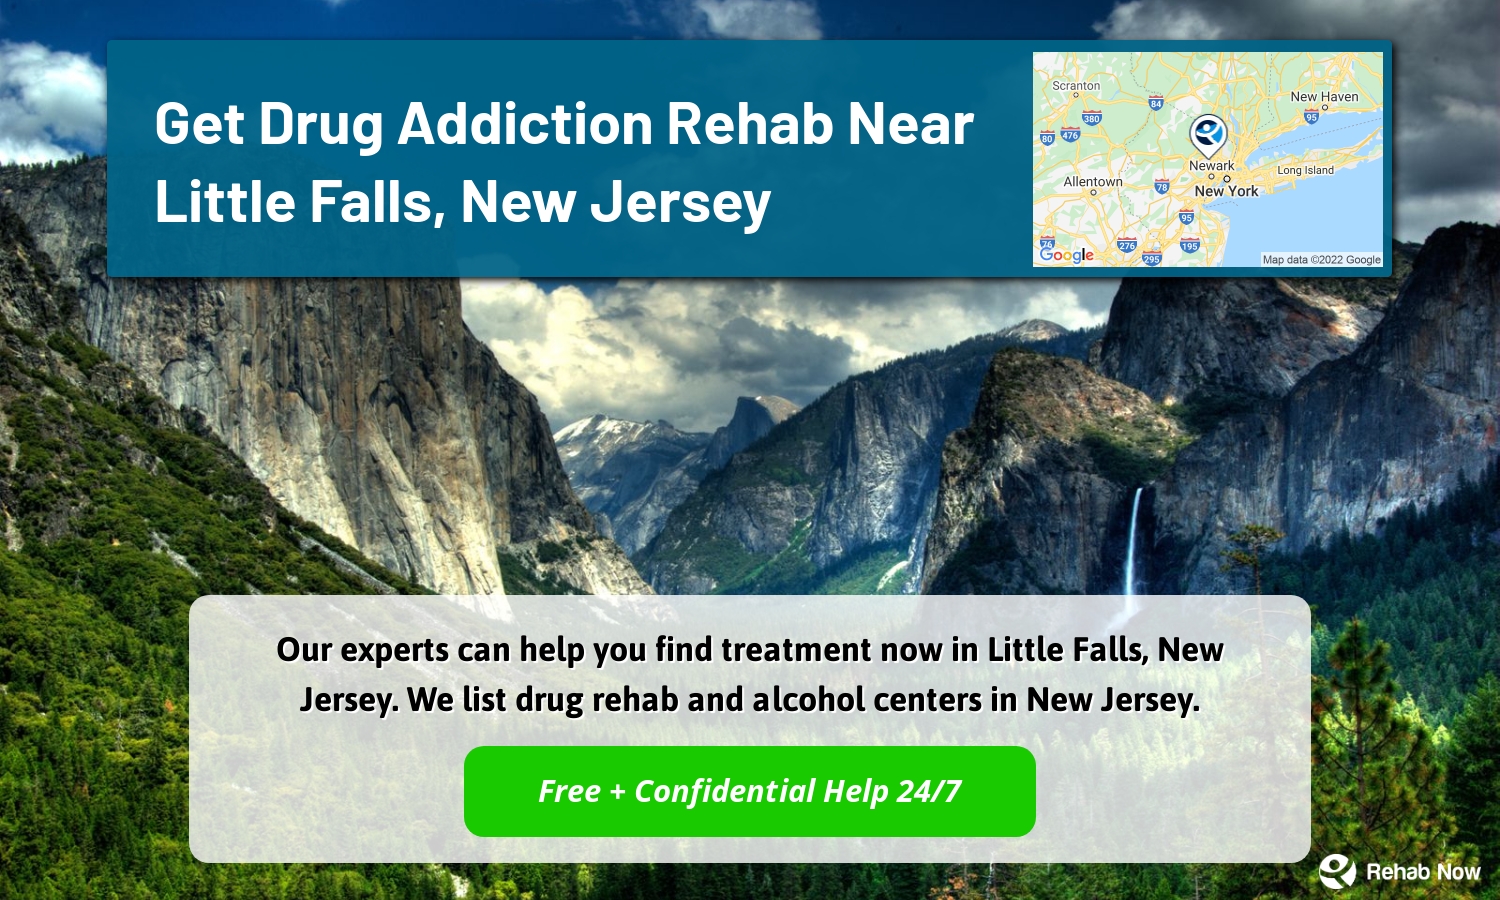 Our experts can help you find treatment now in Little Falls, New Jersey. We list drug rehab and alcohol centers in New Jersey.